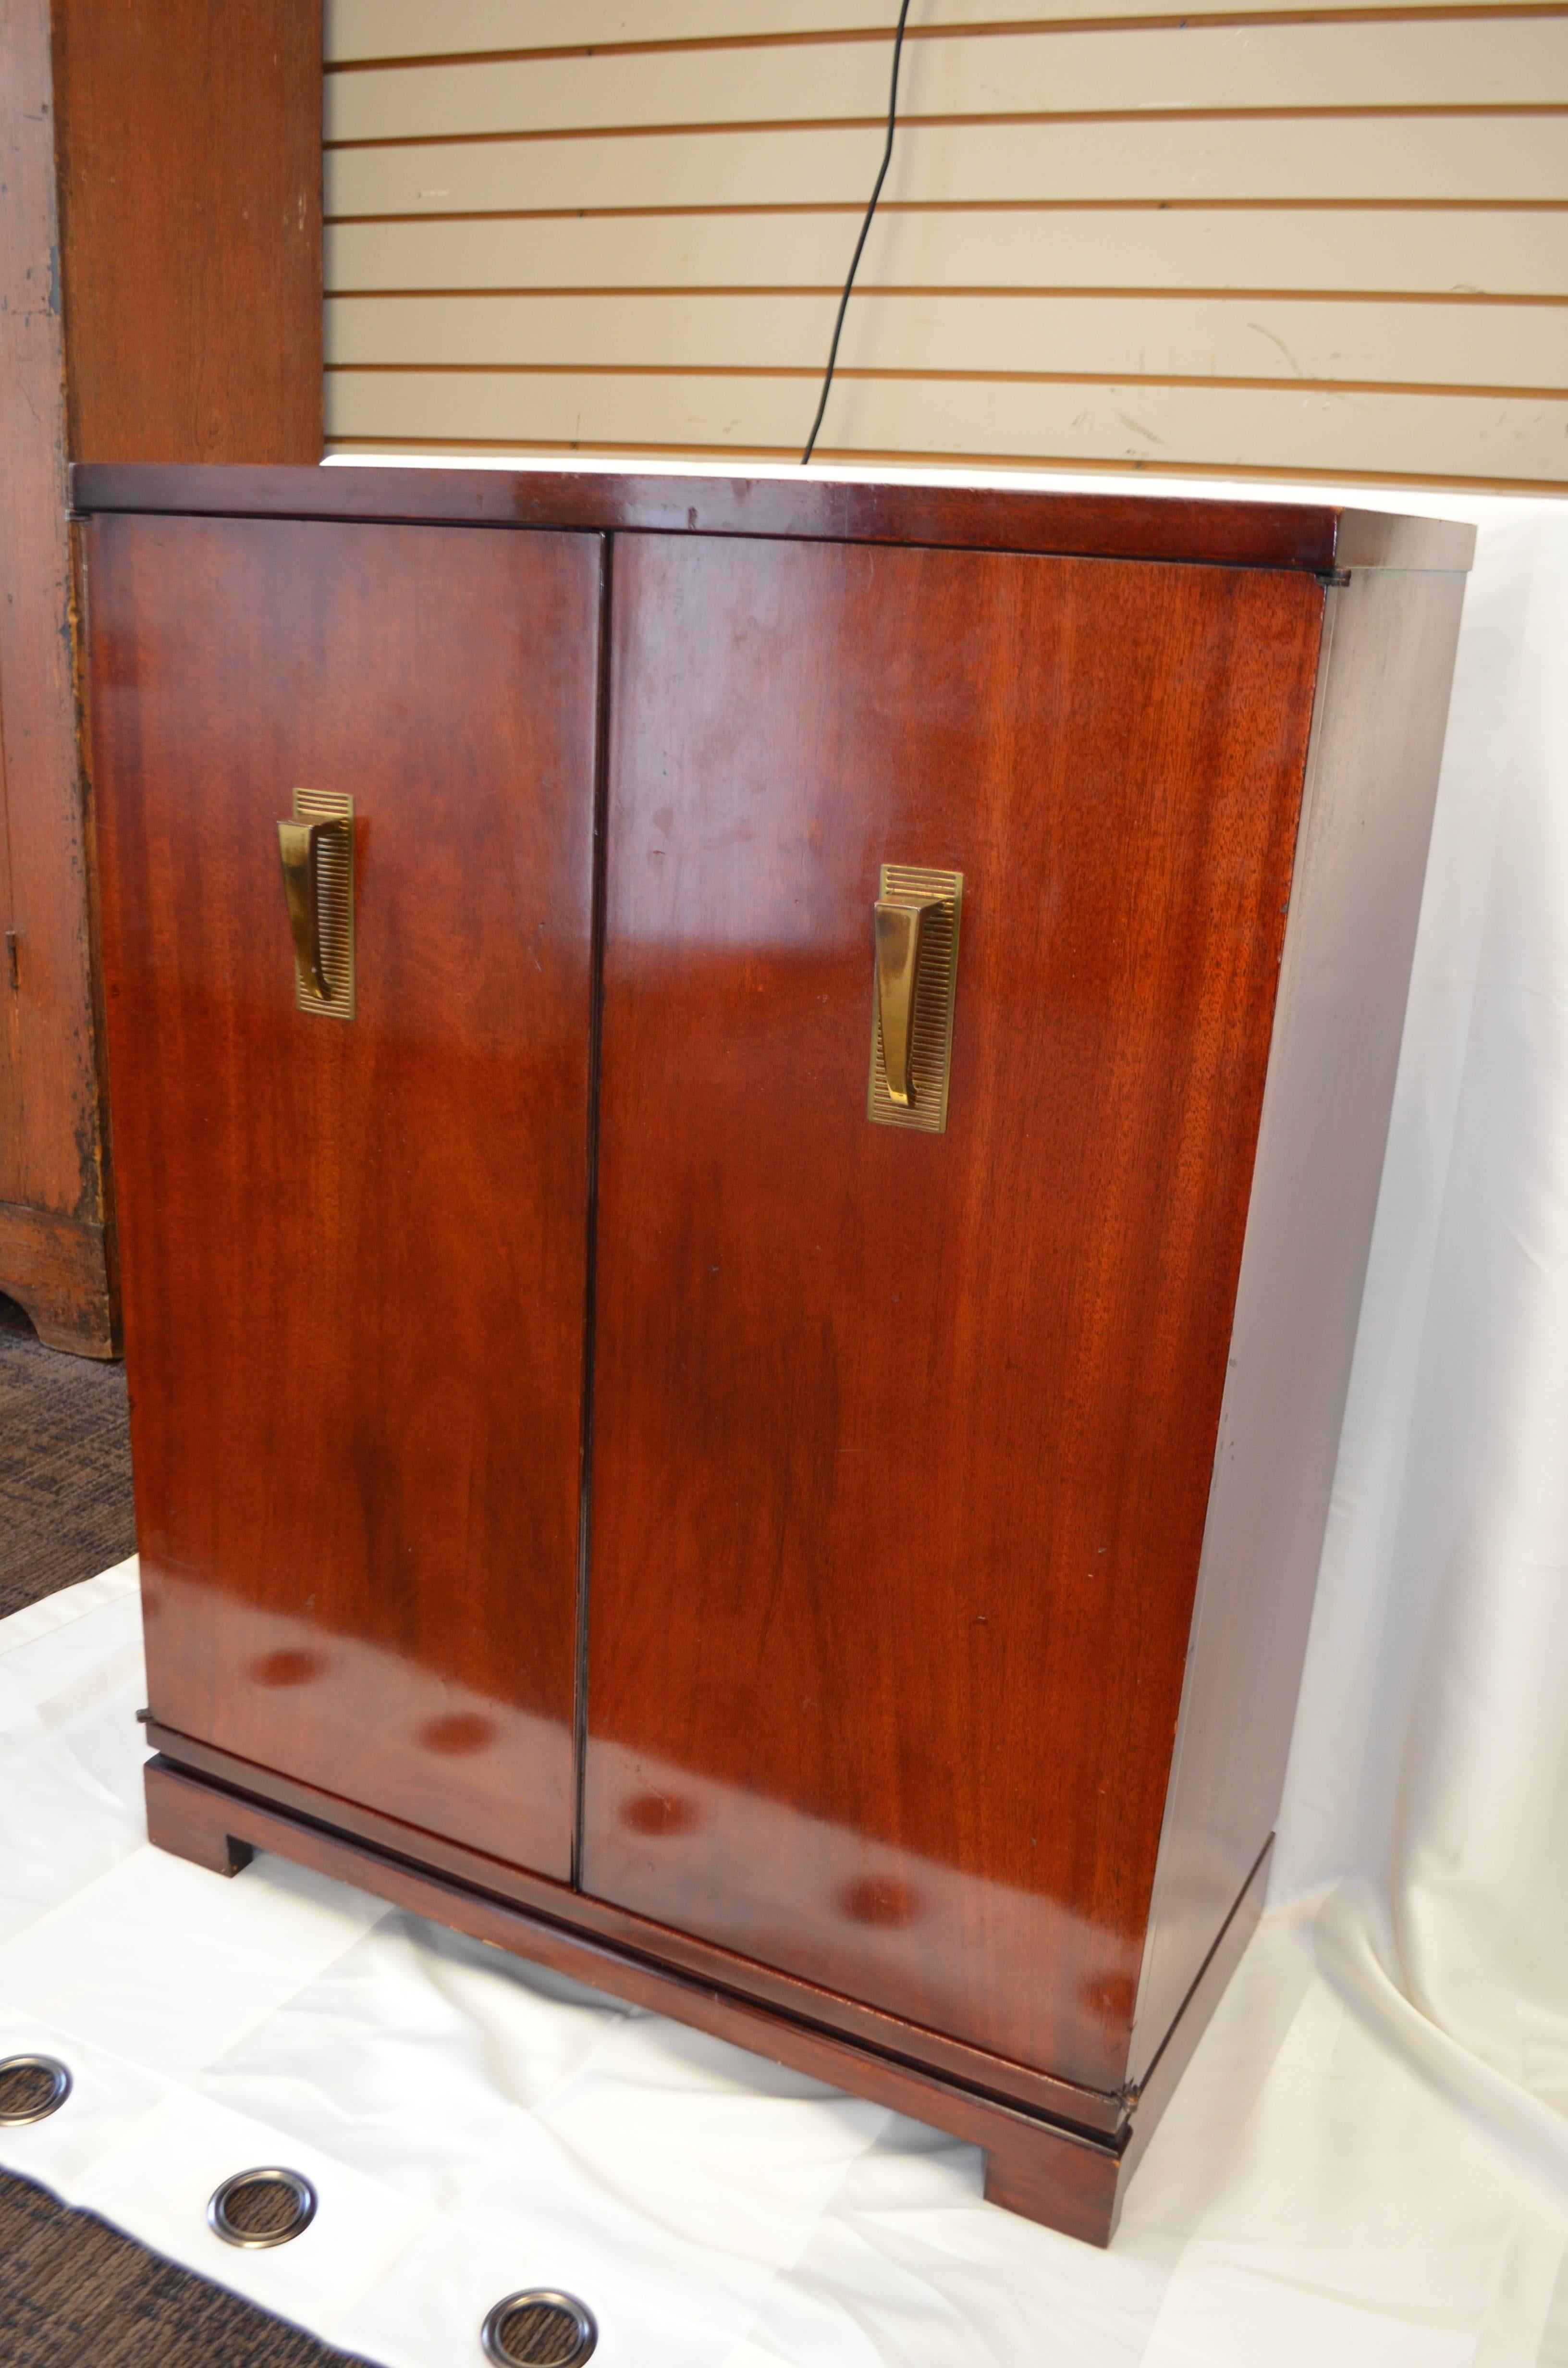 Mid-Century bar or storage cabinet with two doors, brass Deco pulls and two fixed interior shelves. High gloss, mahogany veneer gives the piece sharp, glamorous appeal. Solidly built with sturdy shelving and double doors that snap closed with